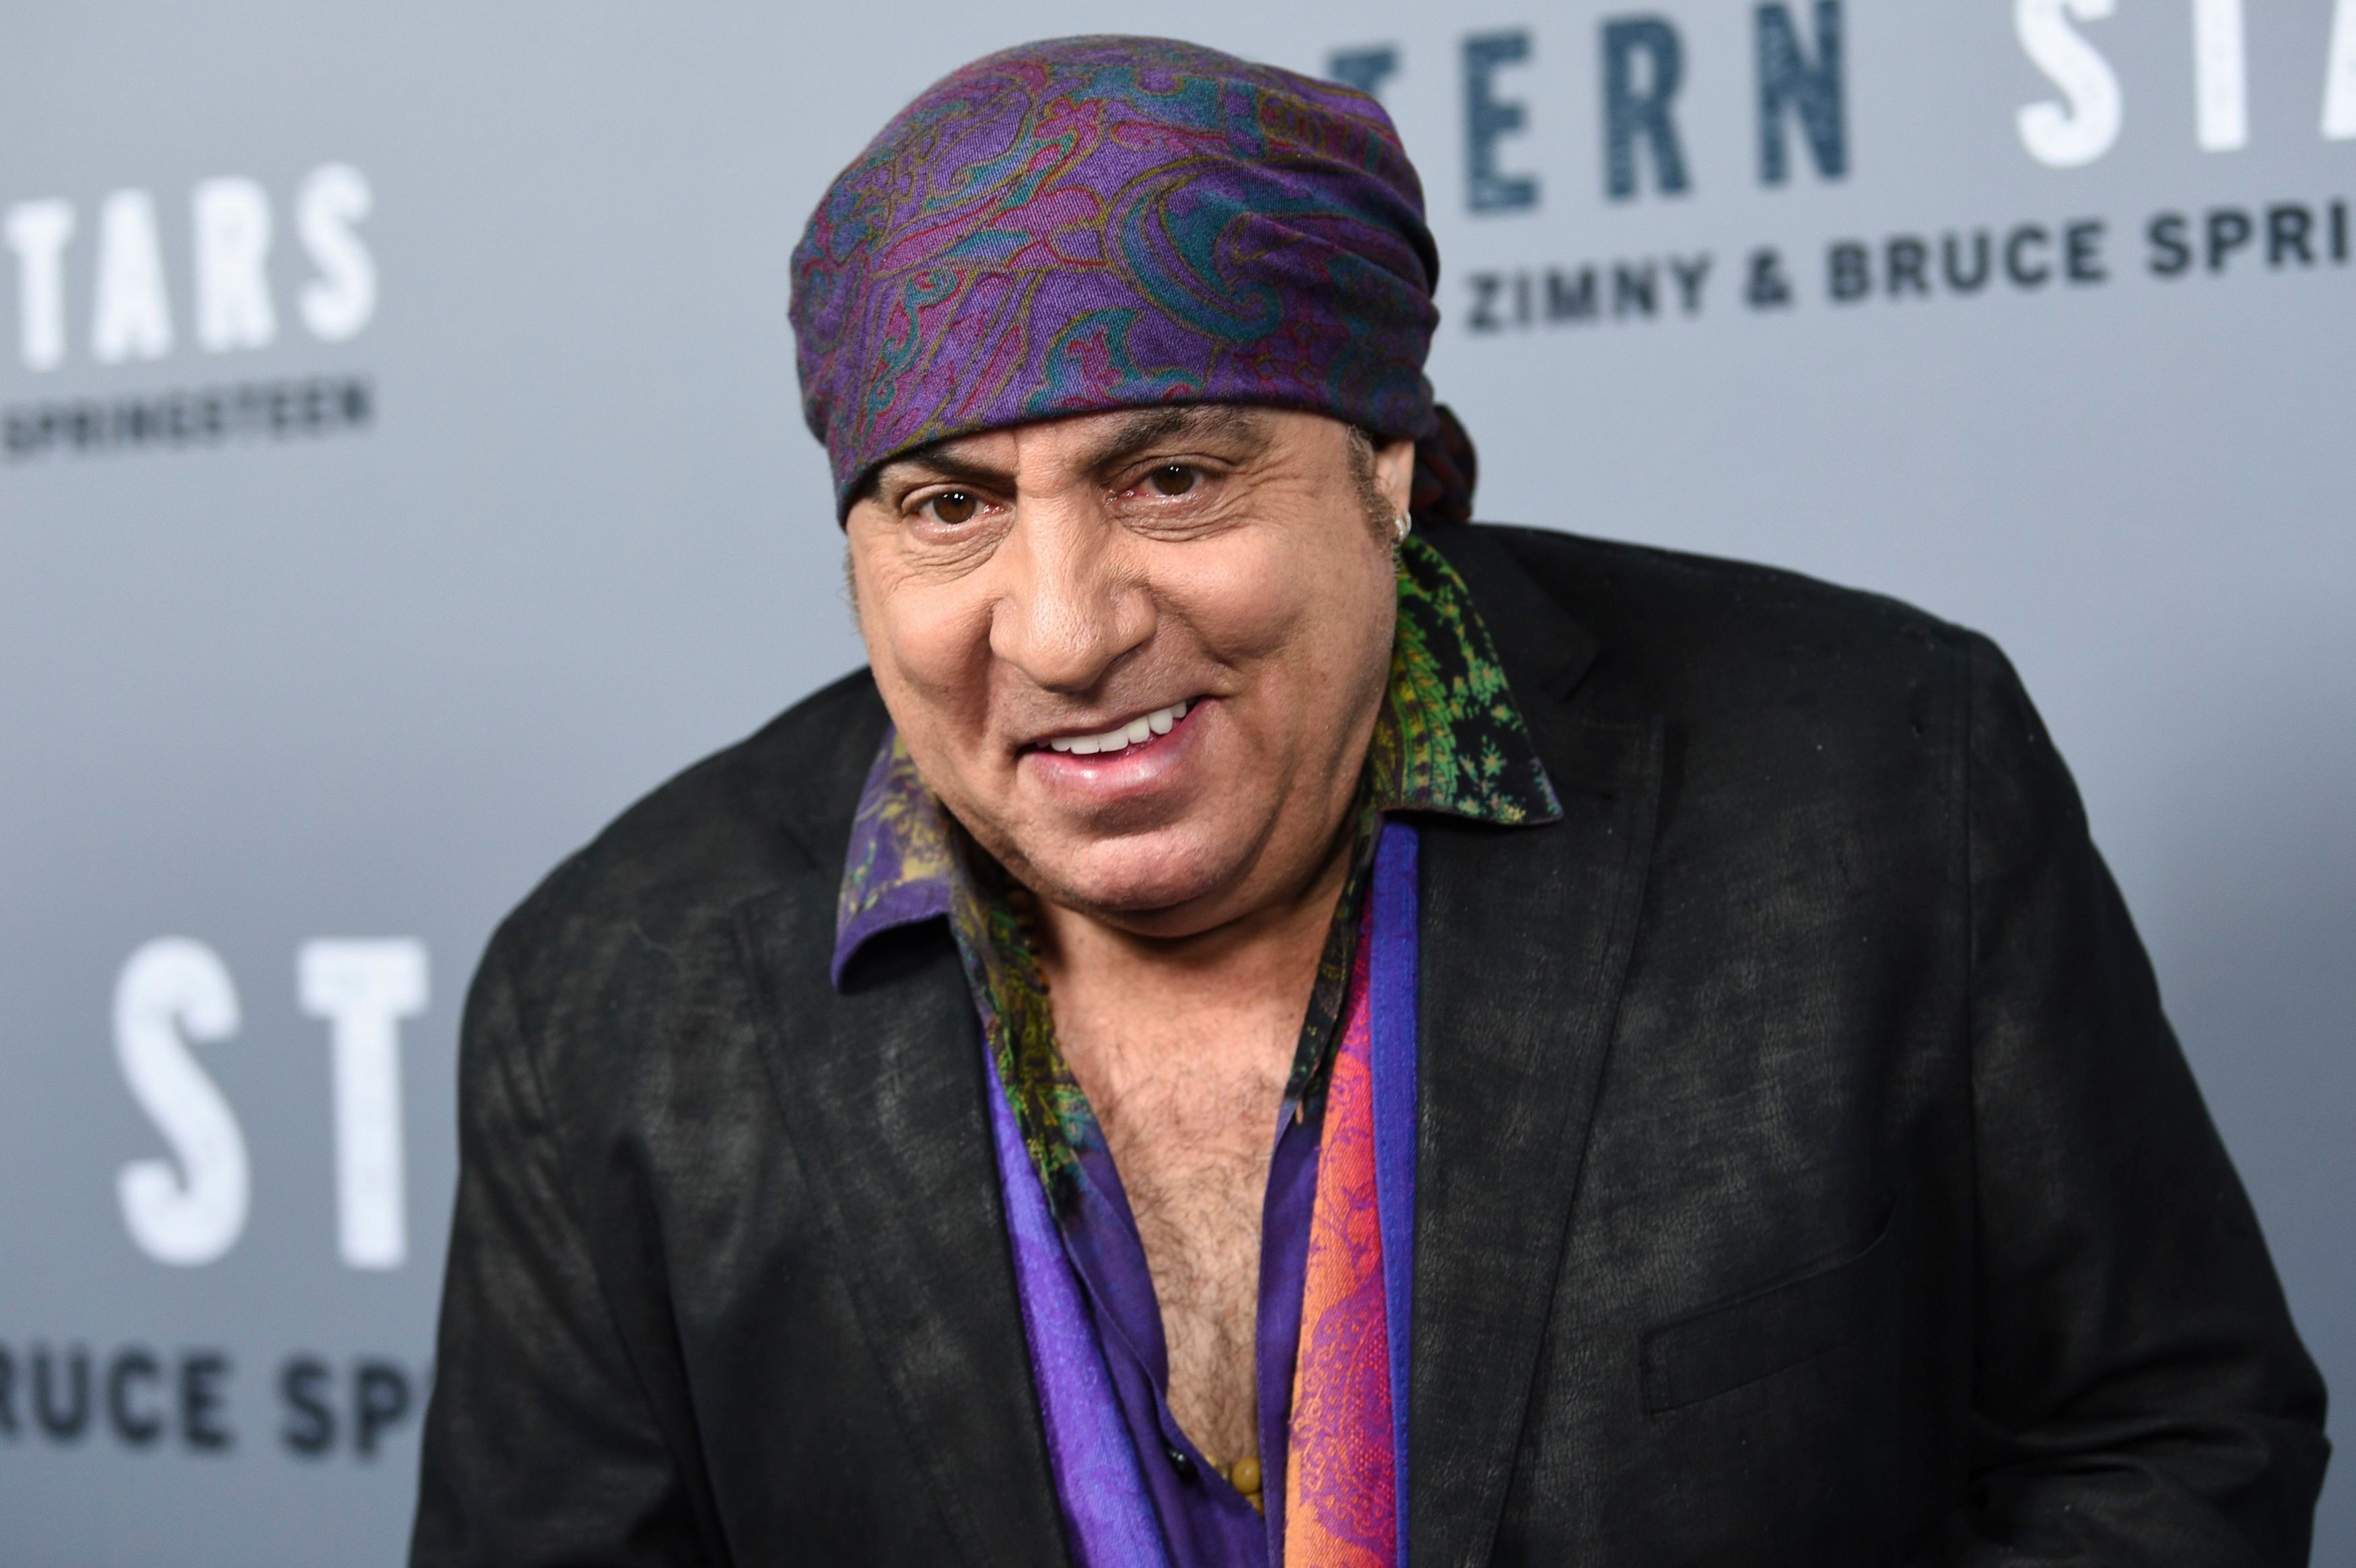 Steven Van Zandt Reflects on His Incredible Career, Marriage and More